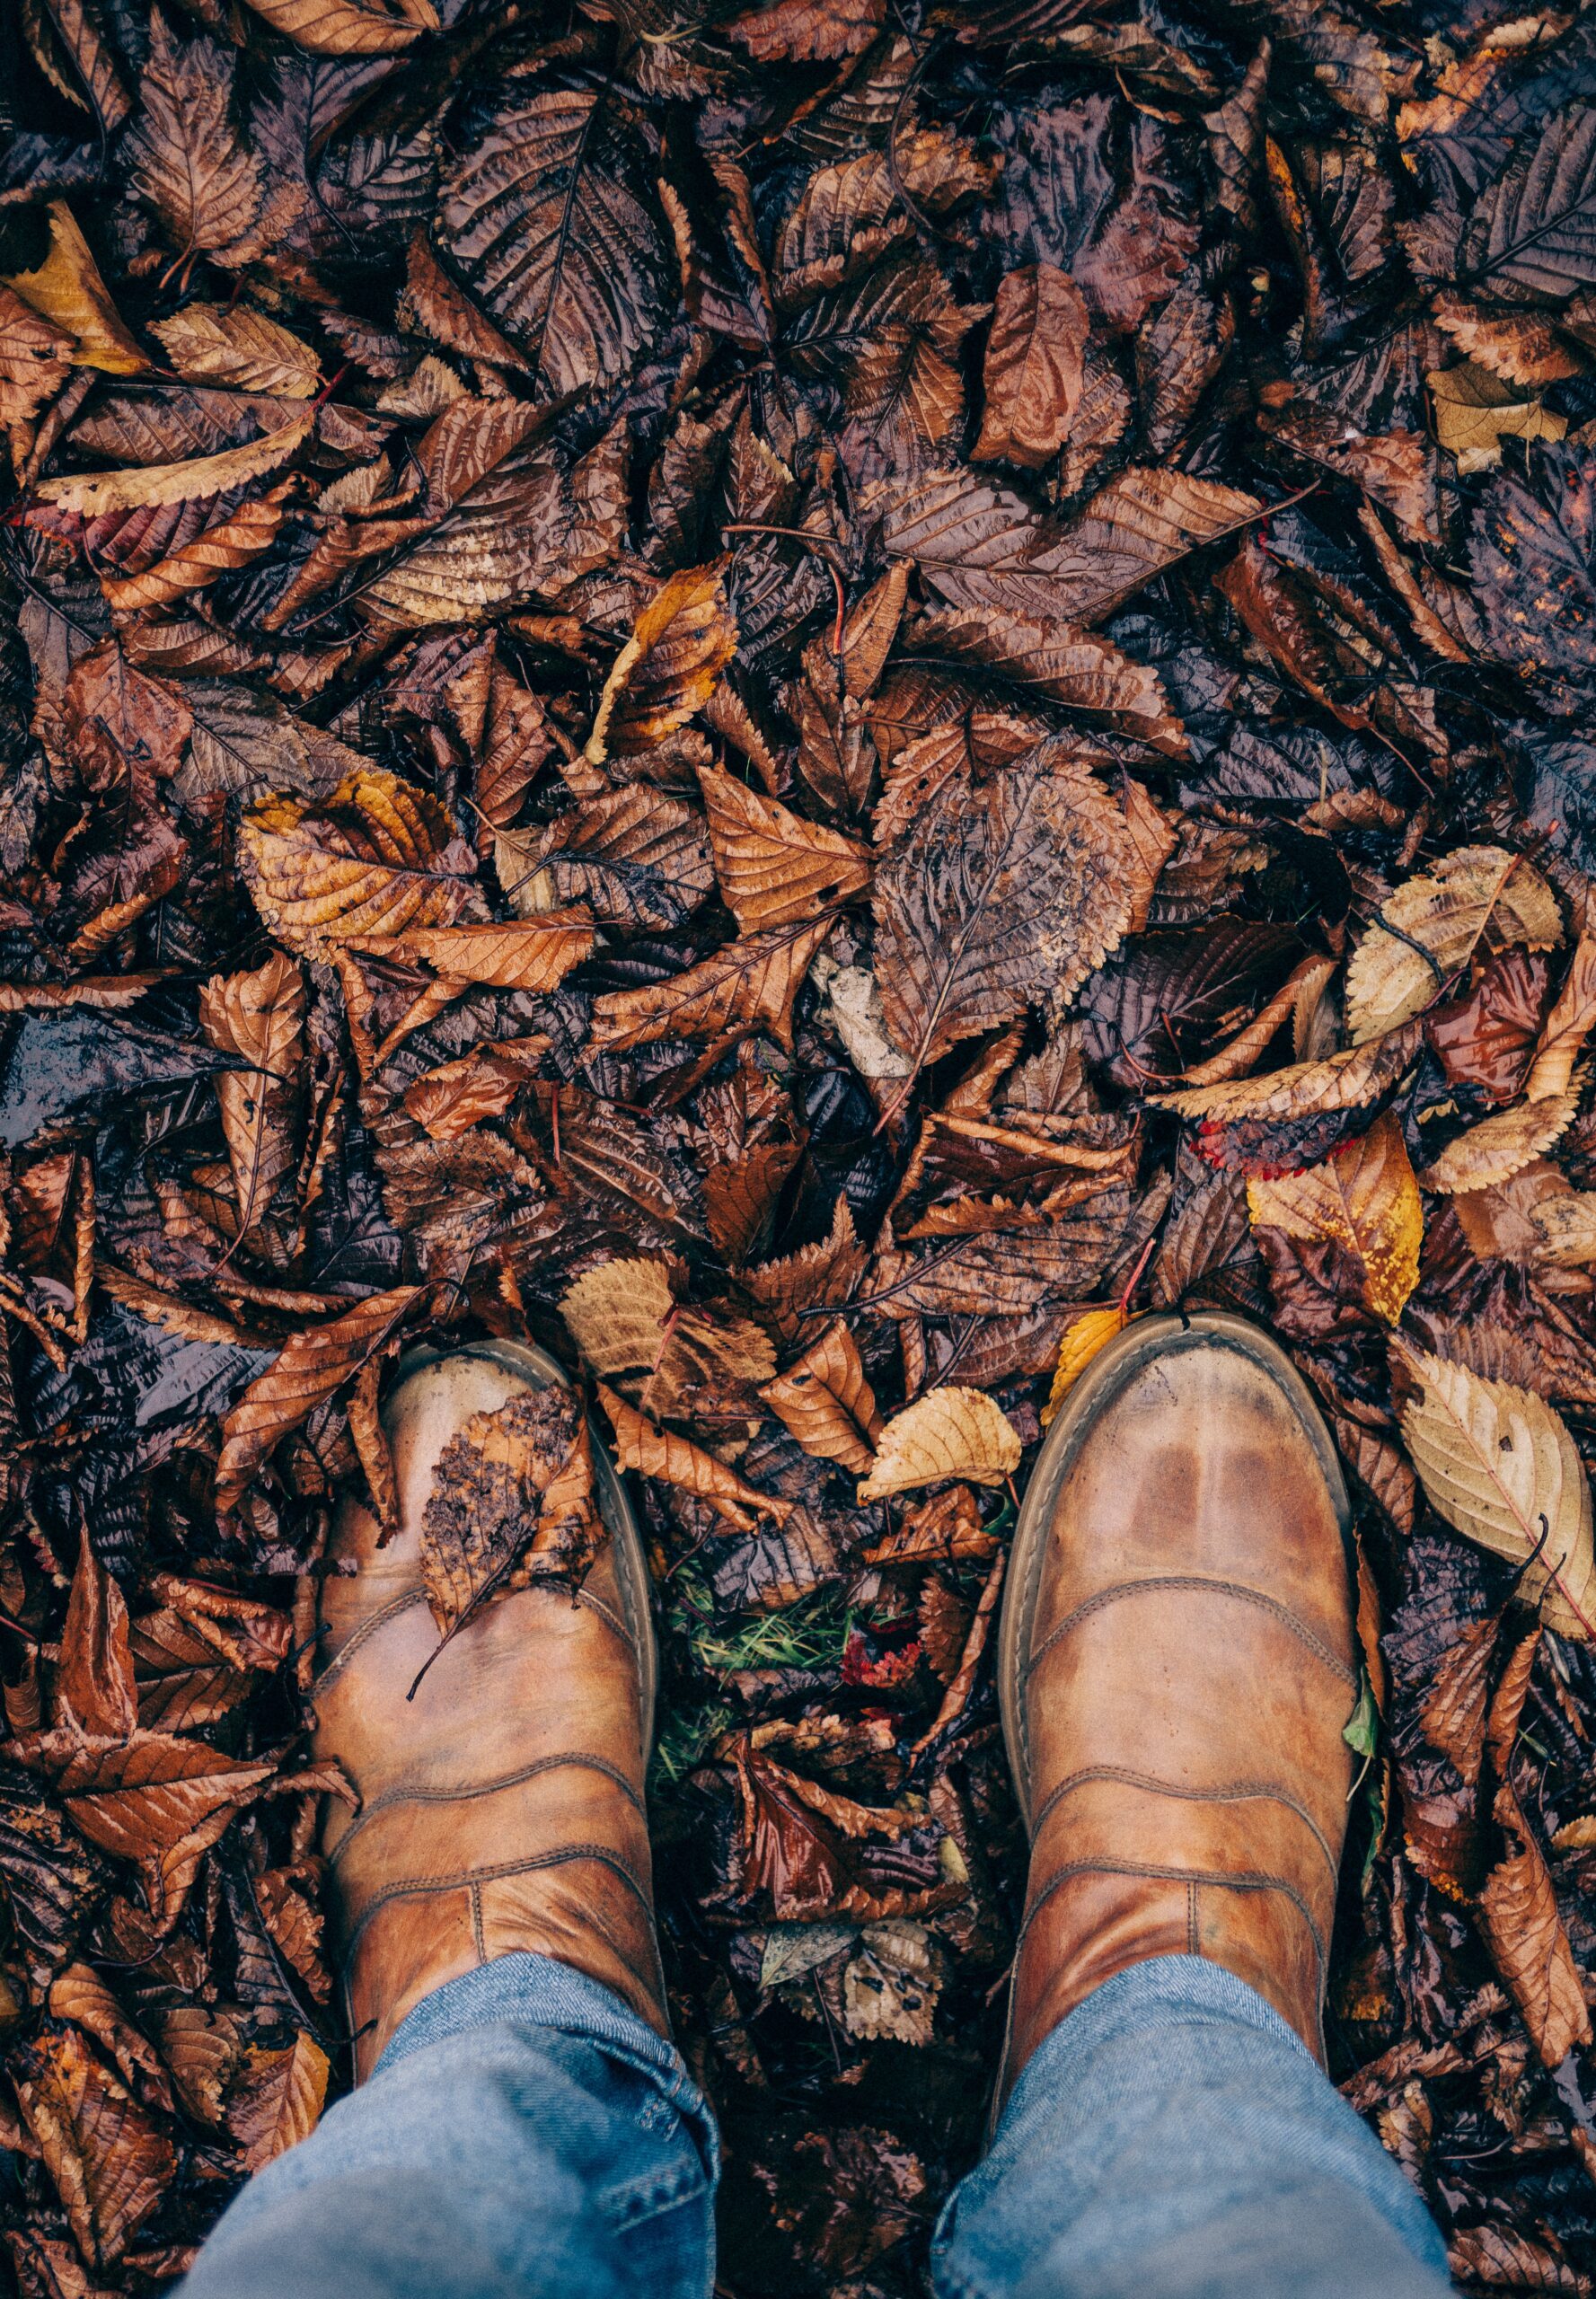 Boots in leaves